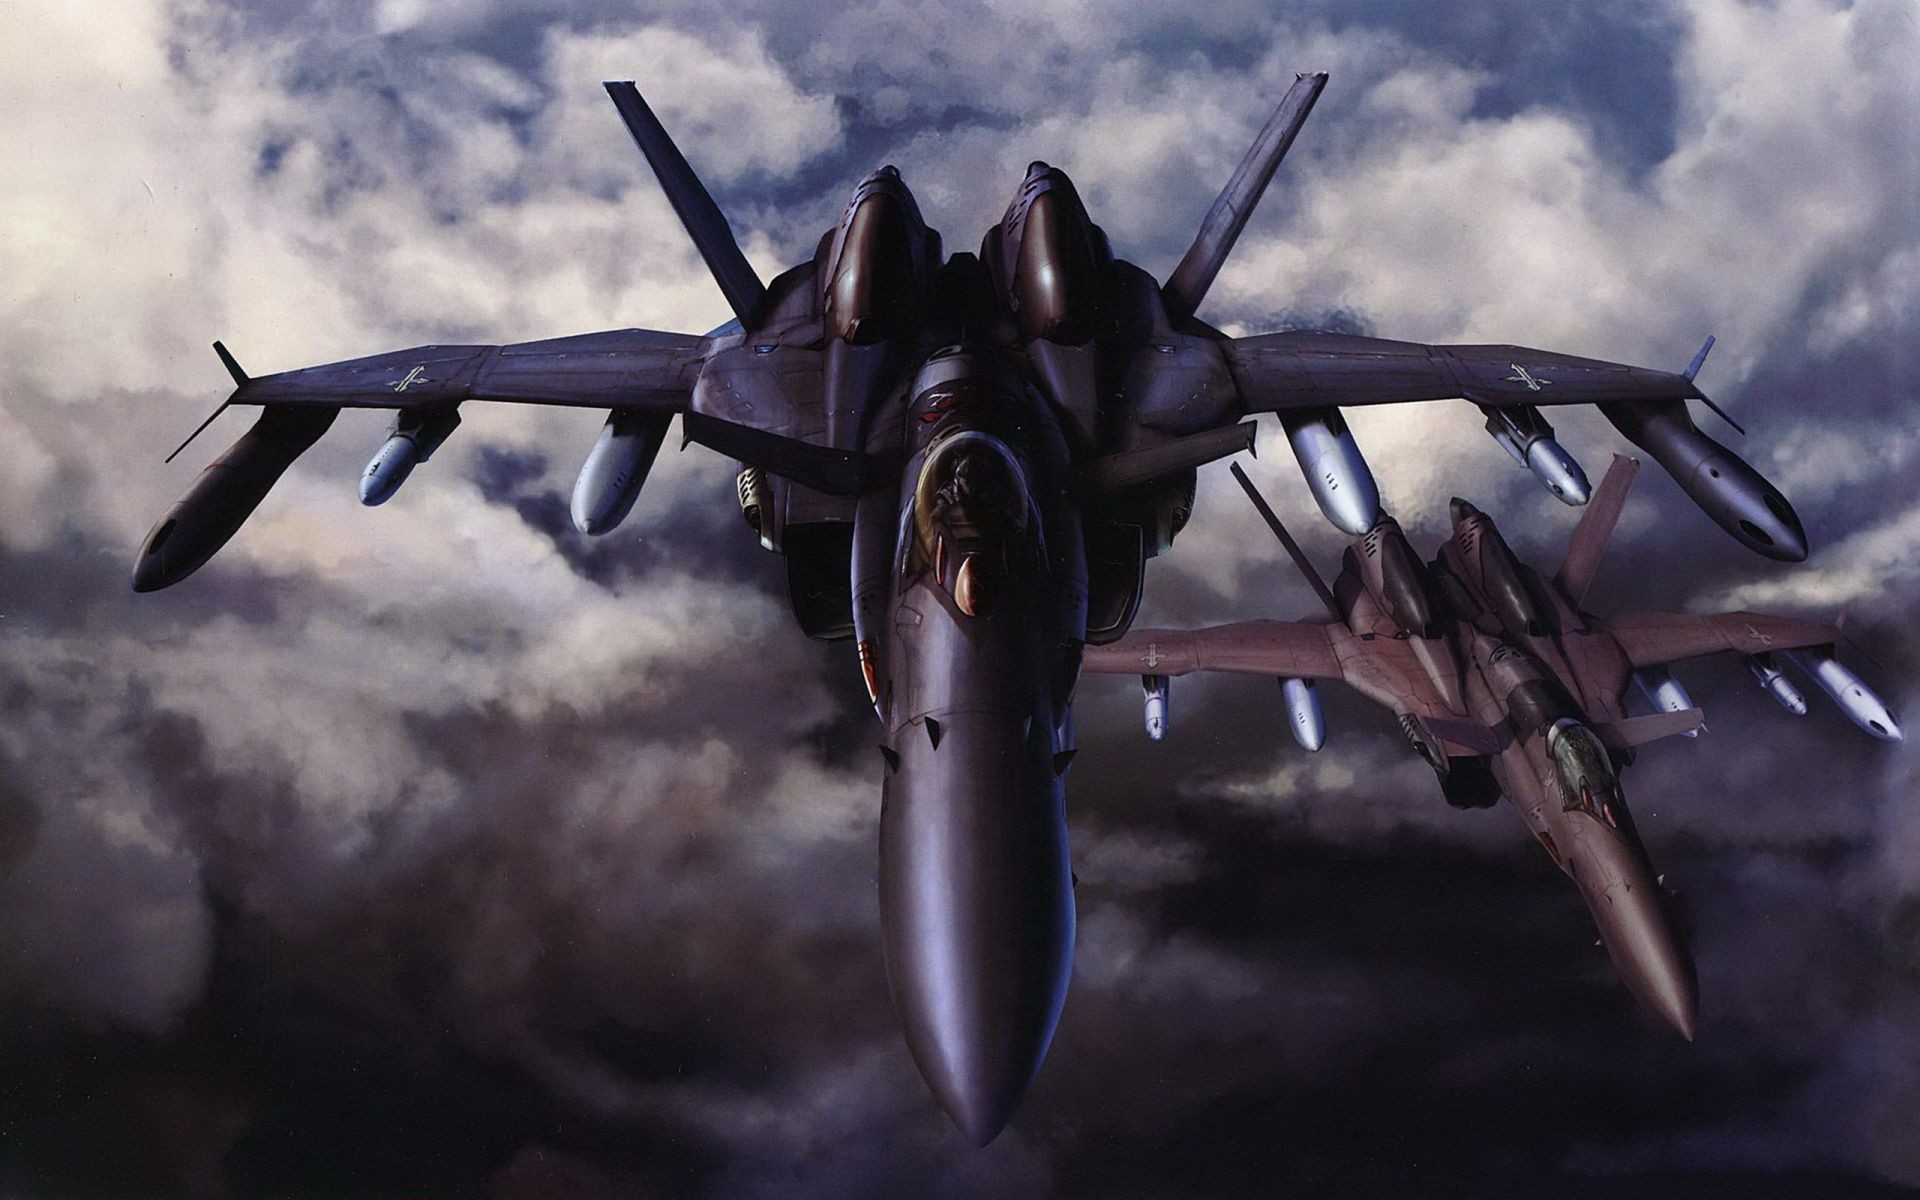 Jet Fighter Military Aircraft Hd Wallpapers In Hd 1920x1200